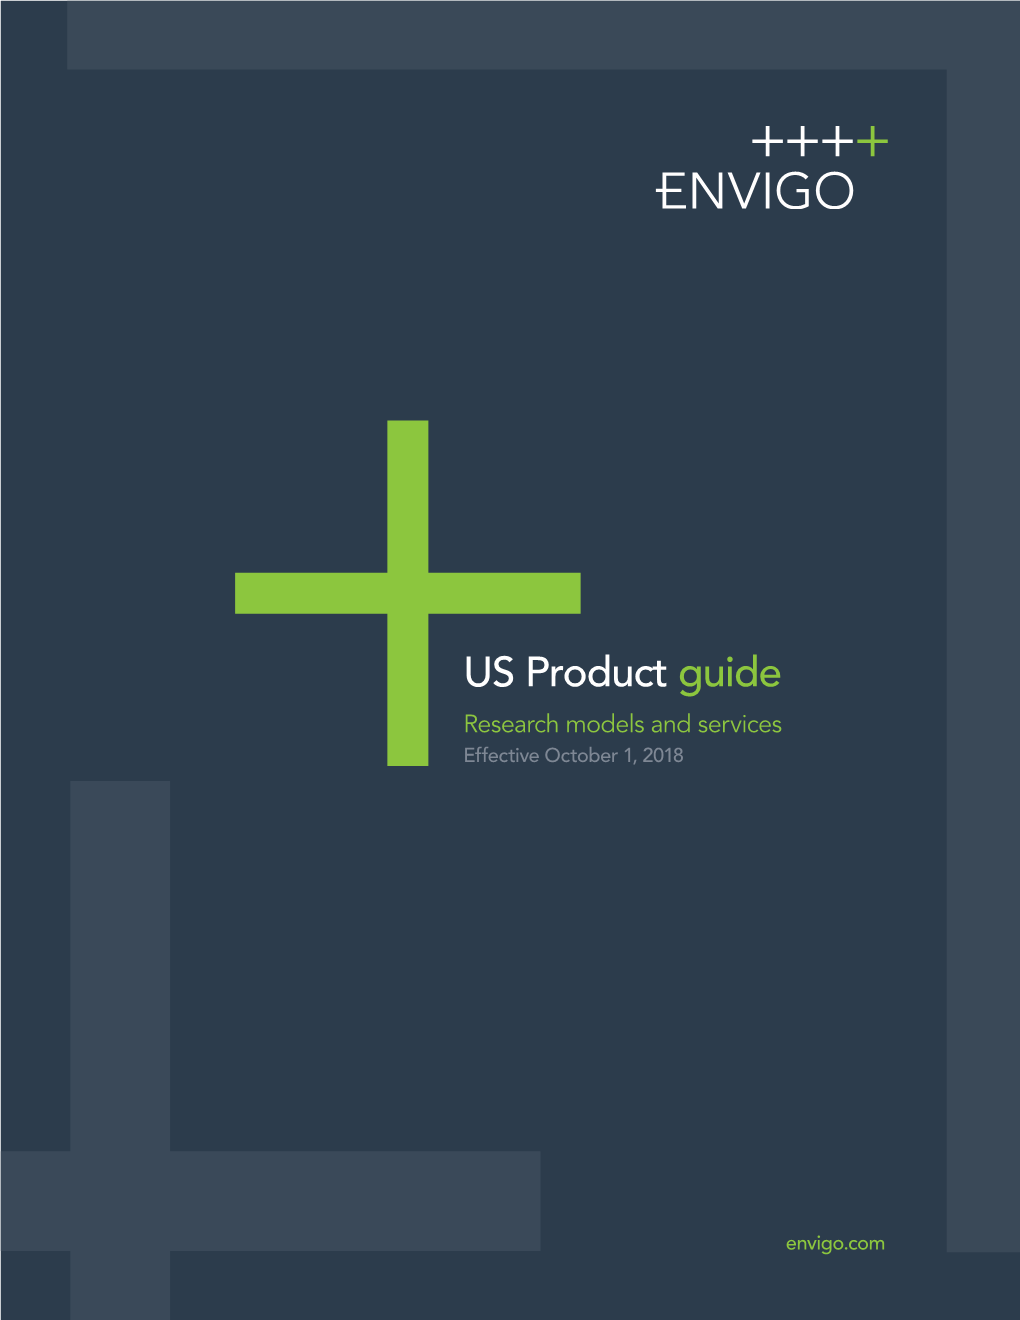 US Product Guide Research Models and Services Effective October 1, 2018